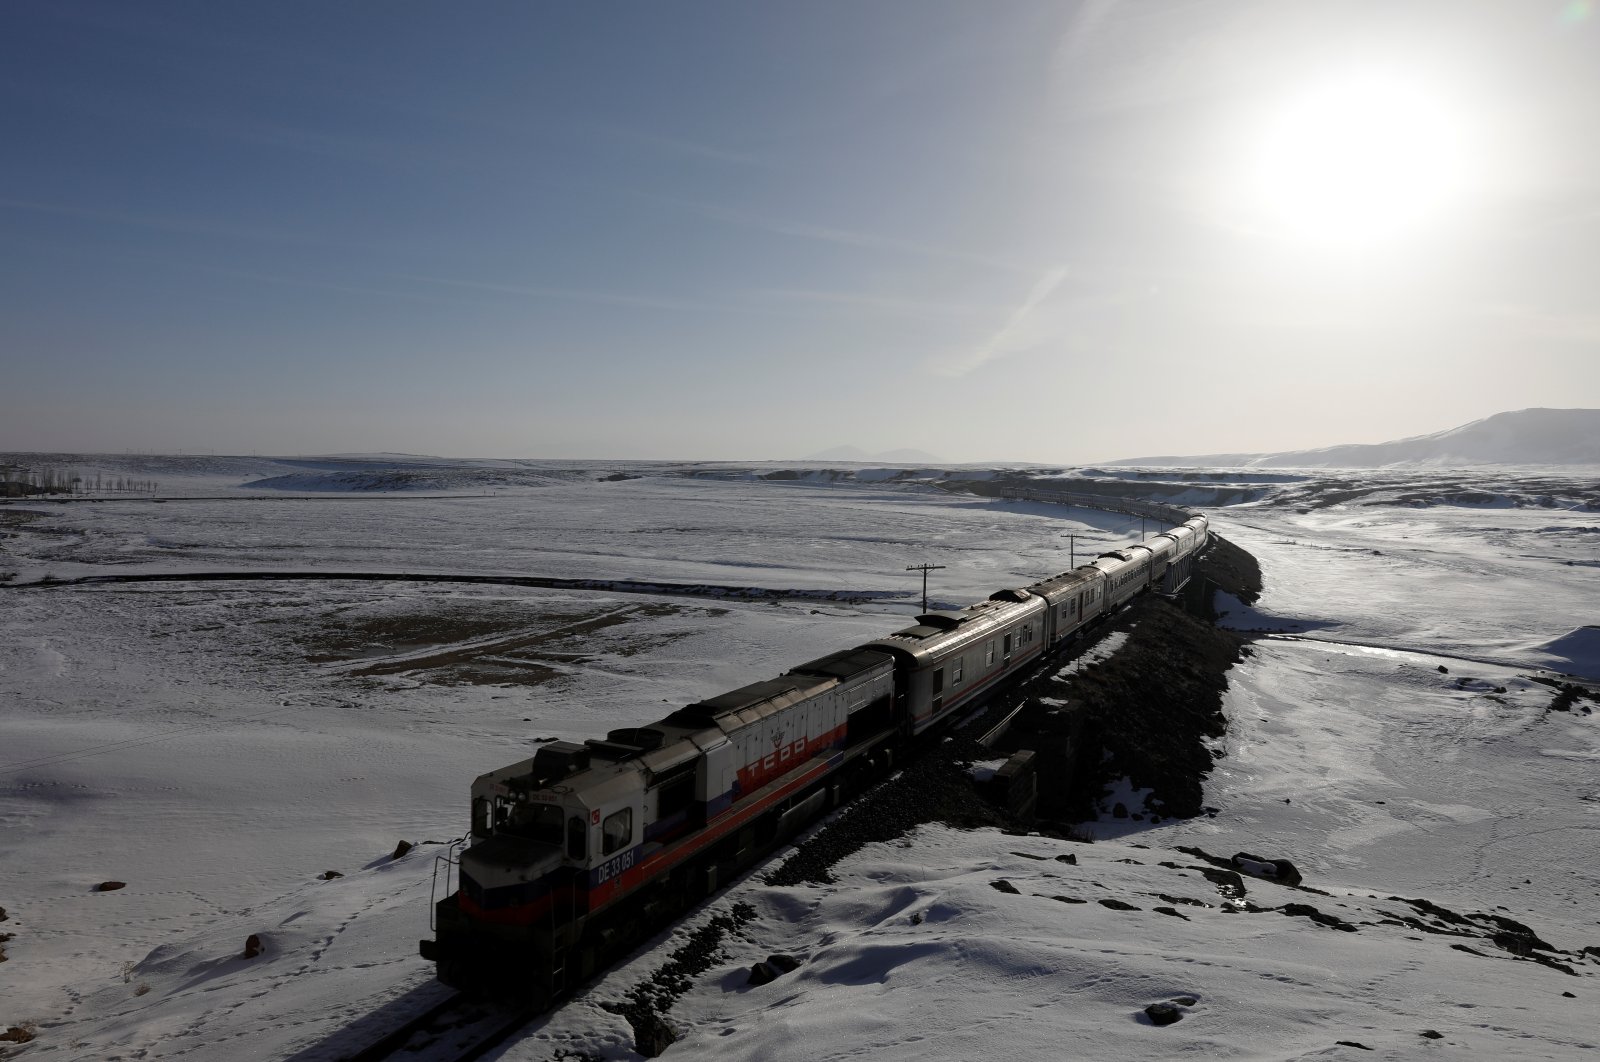 The Eastern Express travels through Kars province en route from Kars to Ankara in eastern Turkey, Feb. 8, 2018. (Reuters Photo)